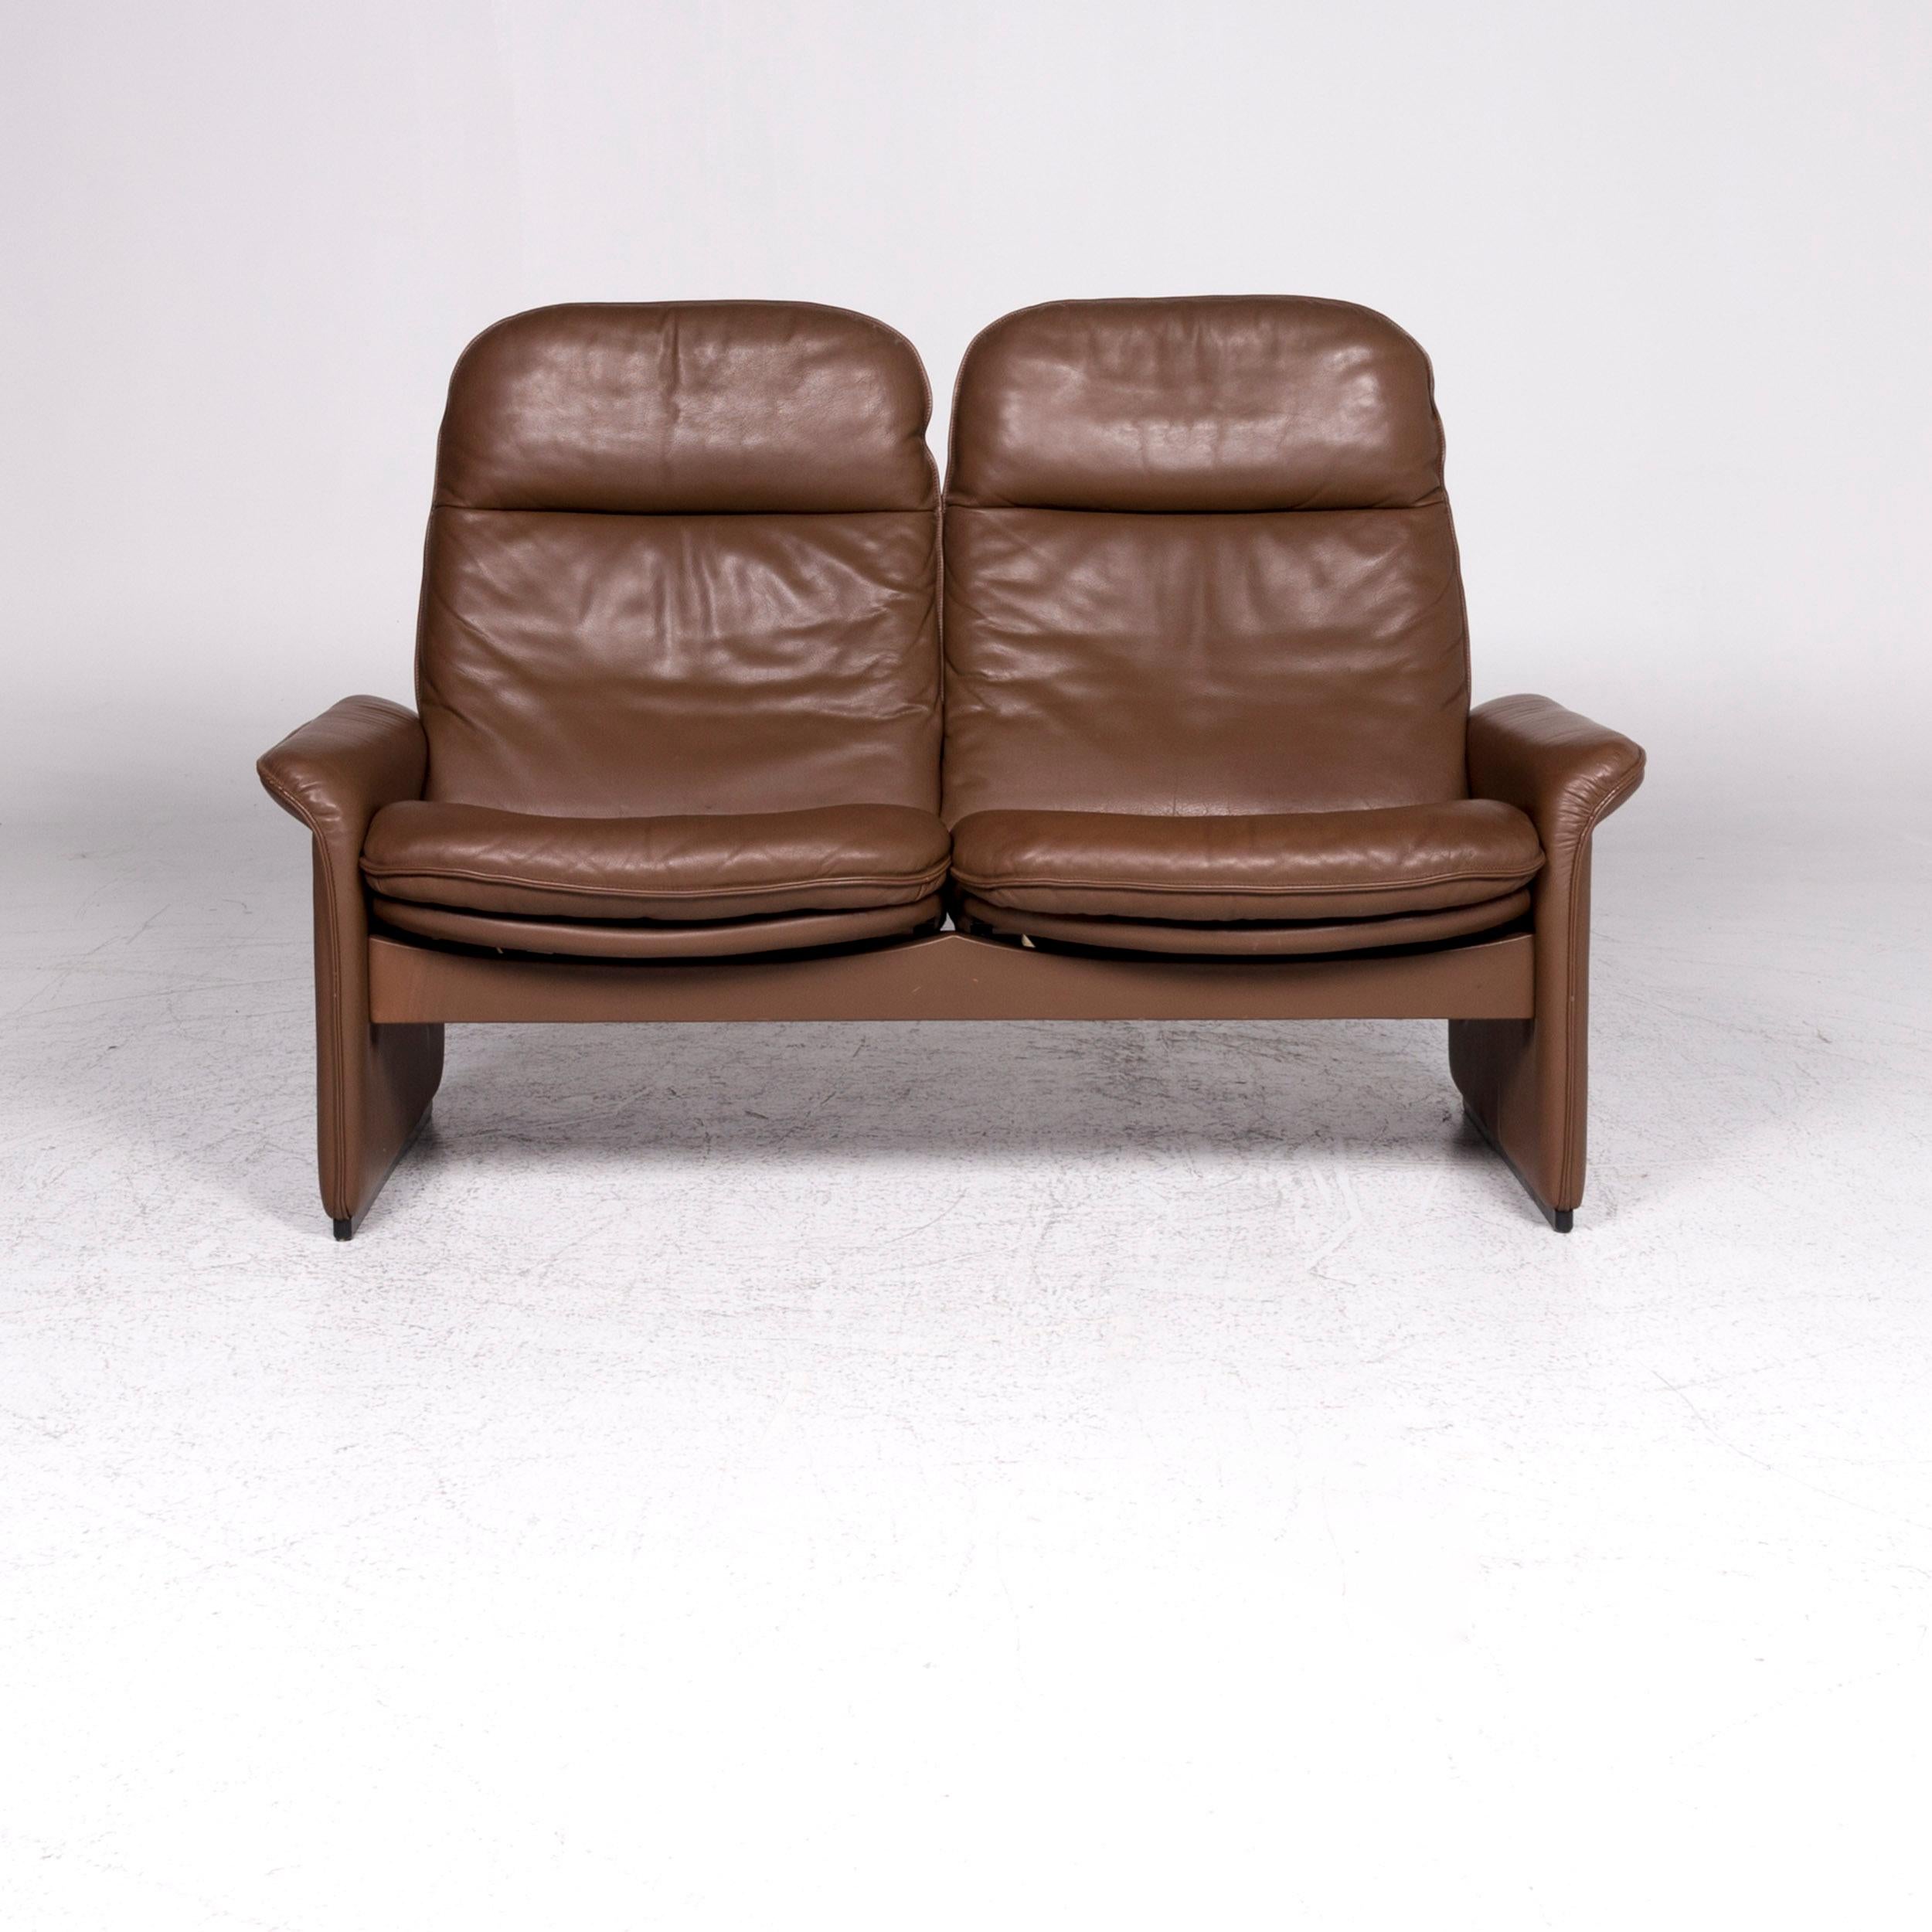 We bring to you a De Sede DS 50 leather sofa brown two-seat couch.

 
 Product measurements in centimeters:
 
Depth: 85
Width: 146
Height: 100
Seat-height: 44
Rest-height: 51
Seat-depth: 50
Seat-width: 122
Back-height: 61.
 